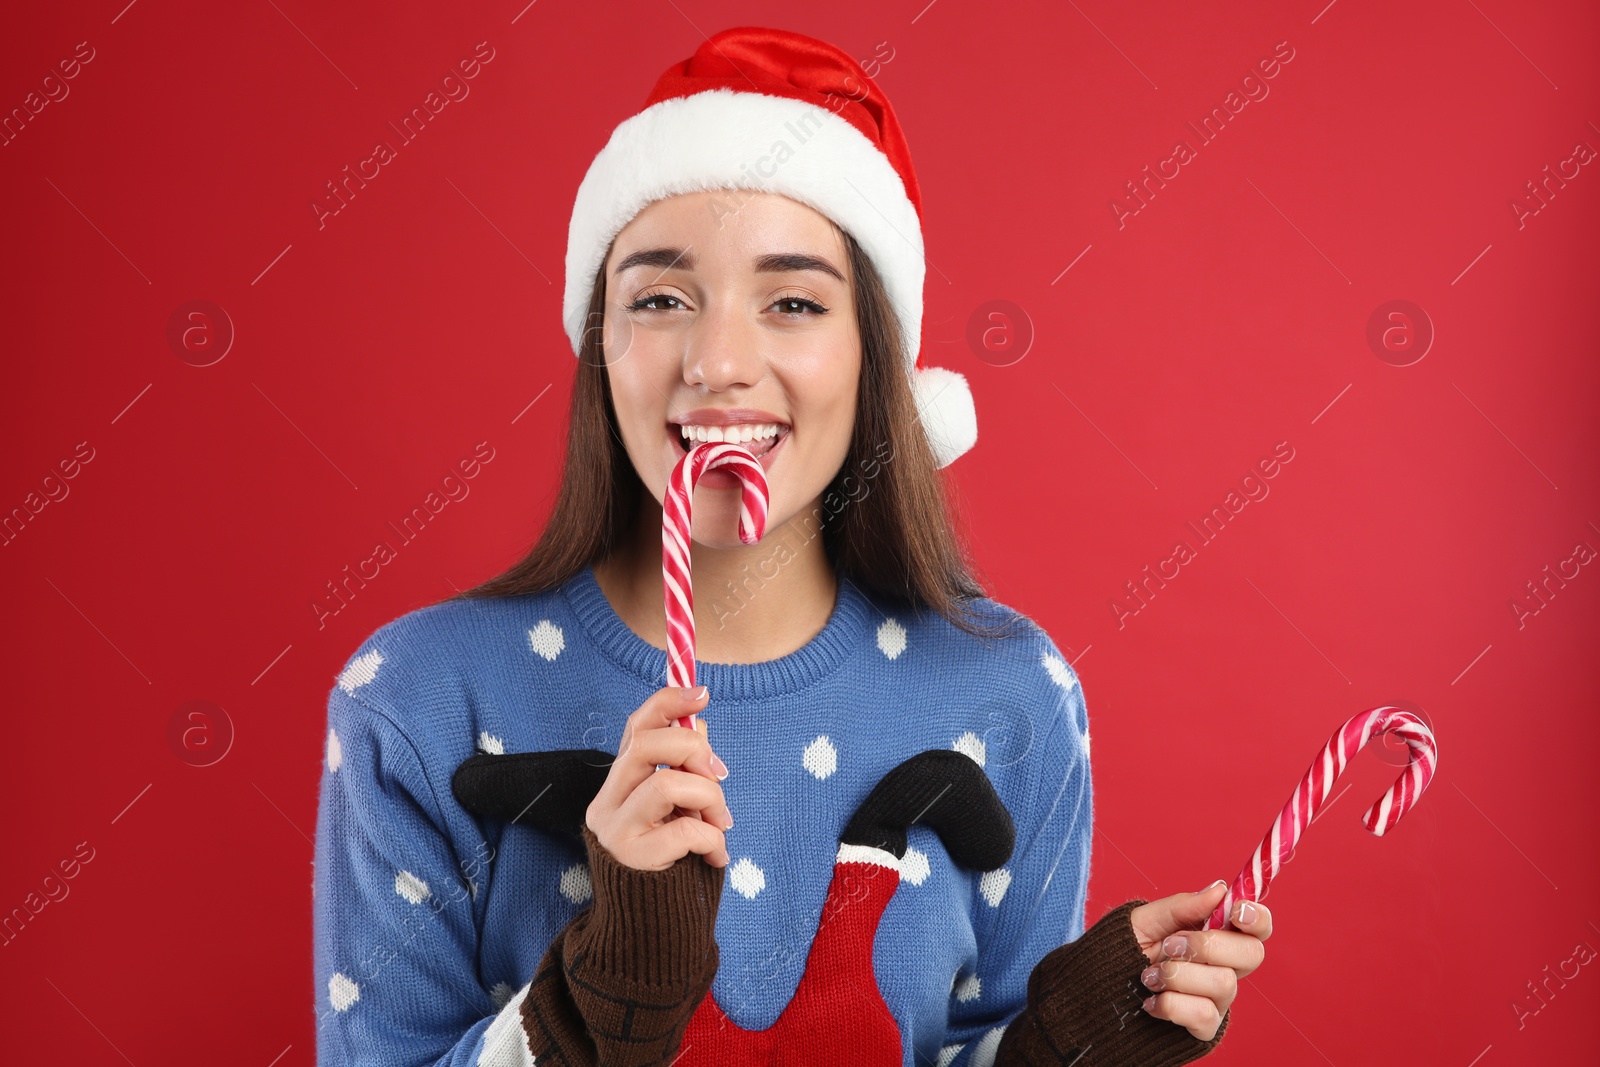 Photo of Young woman in Christmas sweater and Santa hat holding candy canes on red background